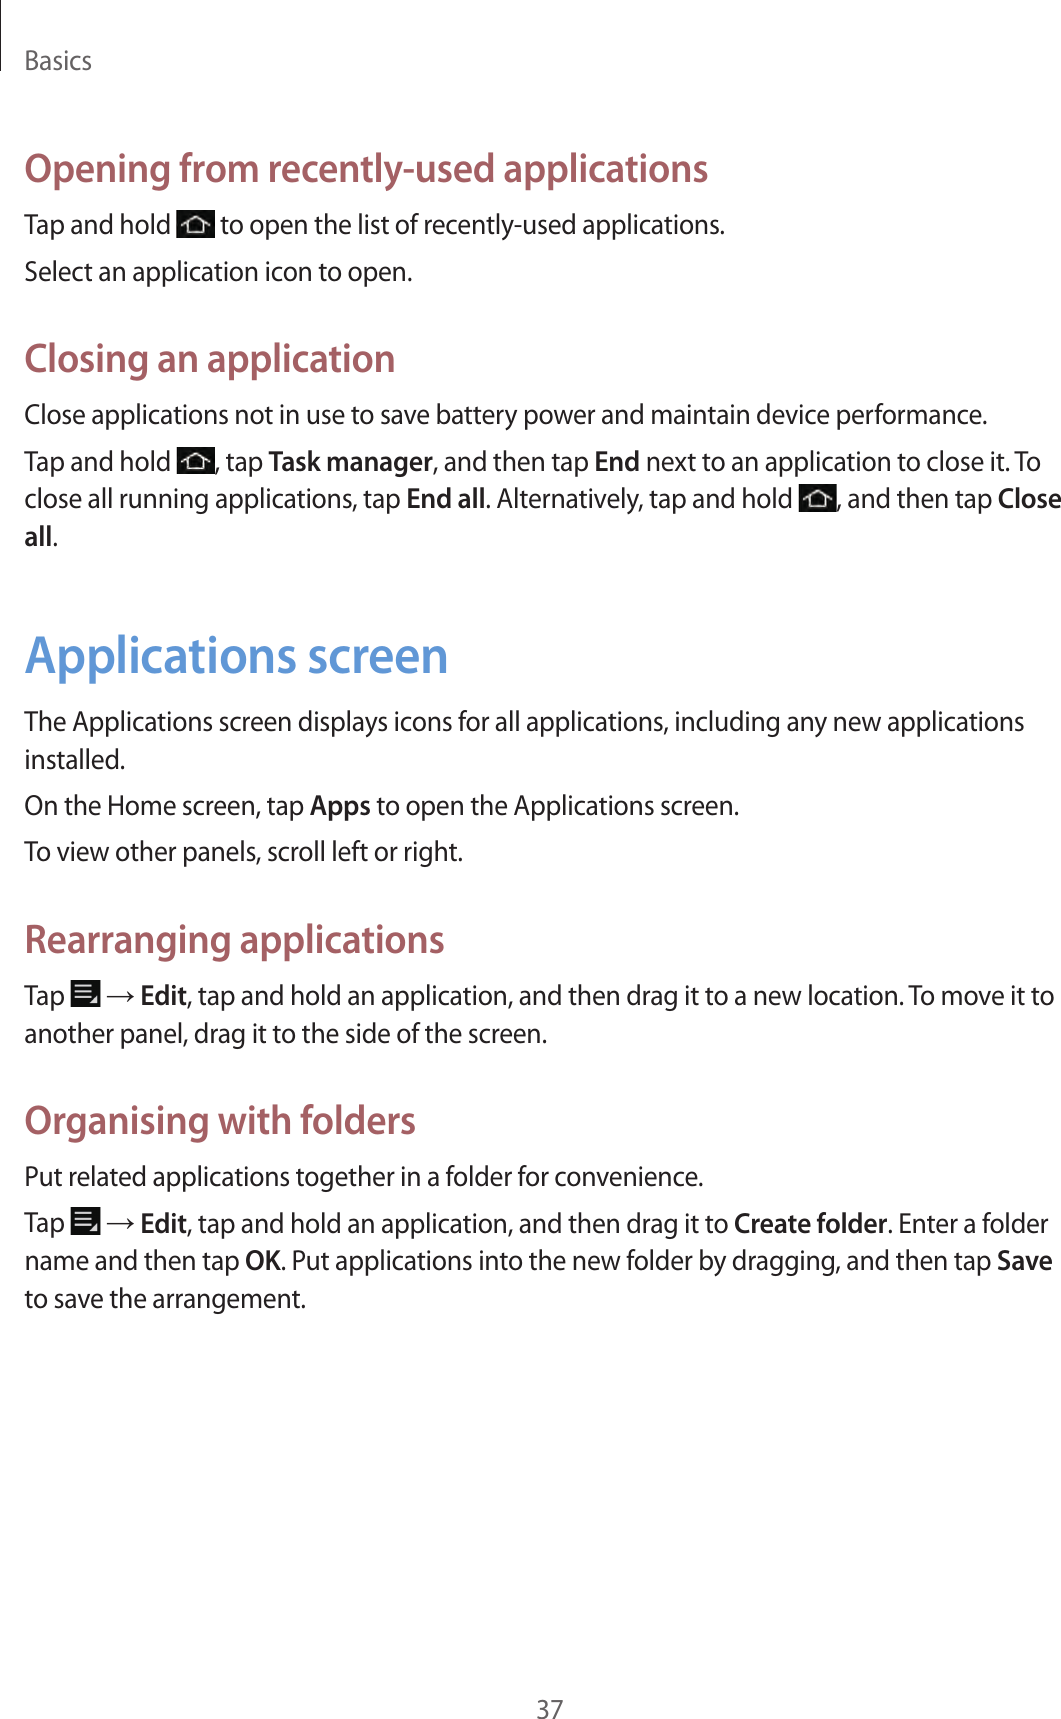 Basics37Opening from recently-used applicationsTap and hold   to open the list of recently-used applications.Select an application icon to open.Closing an applicationClose applications not in use to save battery power and maintain device performance.Tap and hold  , tap Task manager, and then tap End next to an application to close it. To close all running applications, tap End all. Alternatively, tap and hold  , and then tap Close all.Applications screenThe Applications screen displays icons for all applications, including any new applications installed.On the Home screen, tap Apps to open the Applications screen.To view other panels, scroll left or right.Rearranging applicationsTap   → Edit, tap and hold an application, and then drag it to a new location. To move it to another panel, drag it to the side of the screen.Organising with foldersPut related applications together in a folder for convenience.Tap   → Edit, tap and hold an application, and then drag it to Create folder. Enter a folder name and then tap OK. Put applications into the new folder by dragging, and then tap Save to save the arrangement.